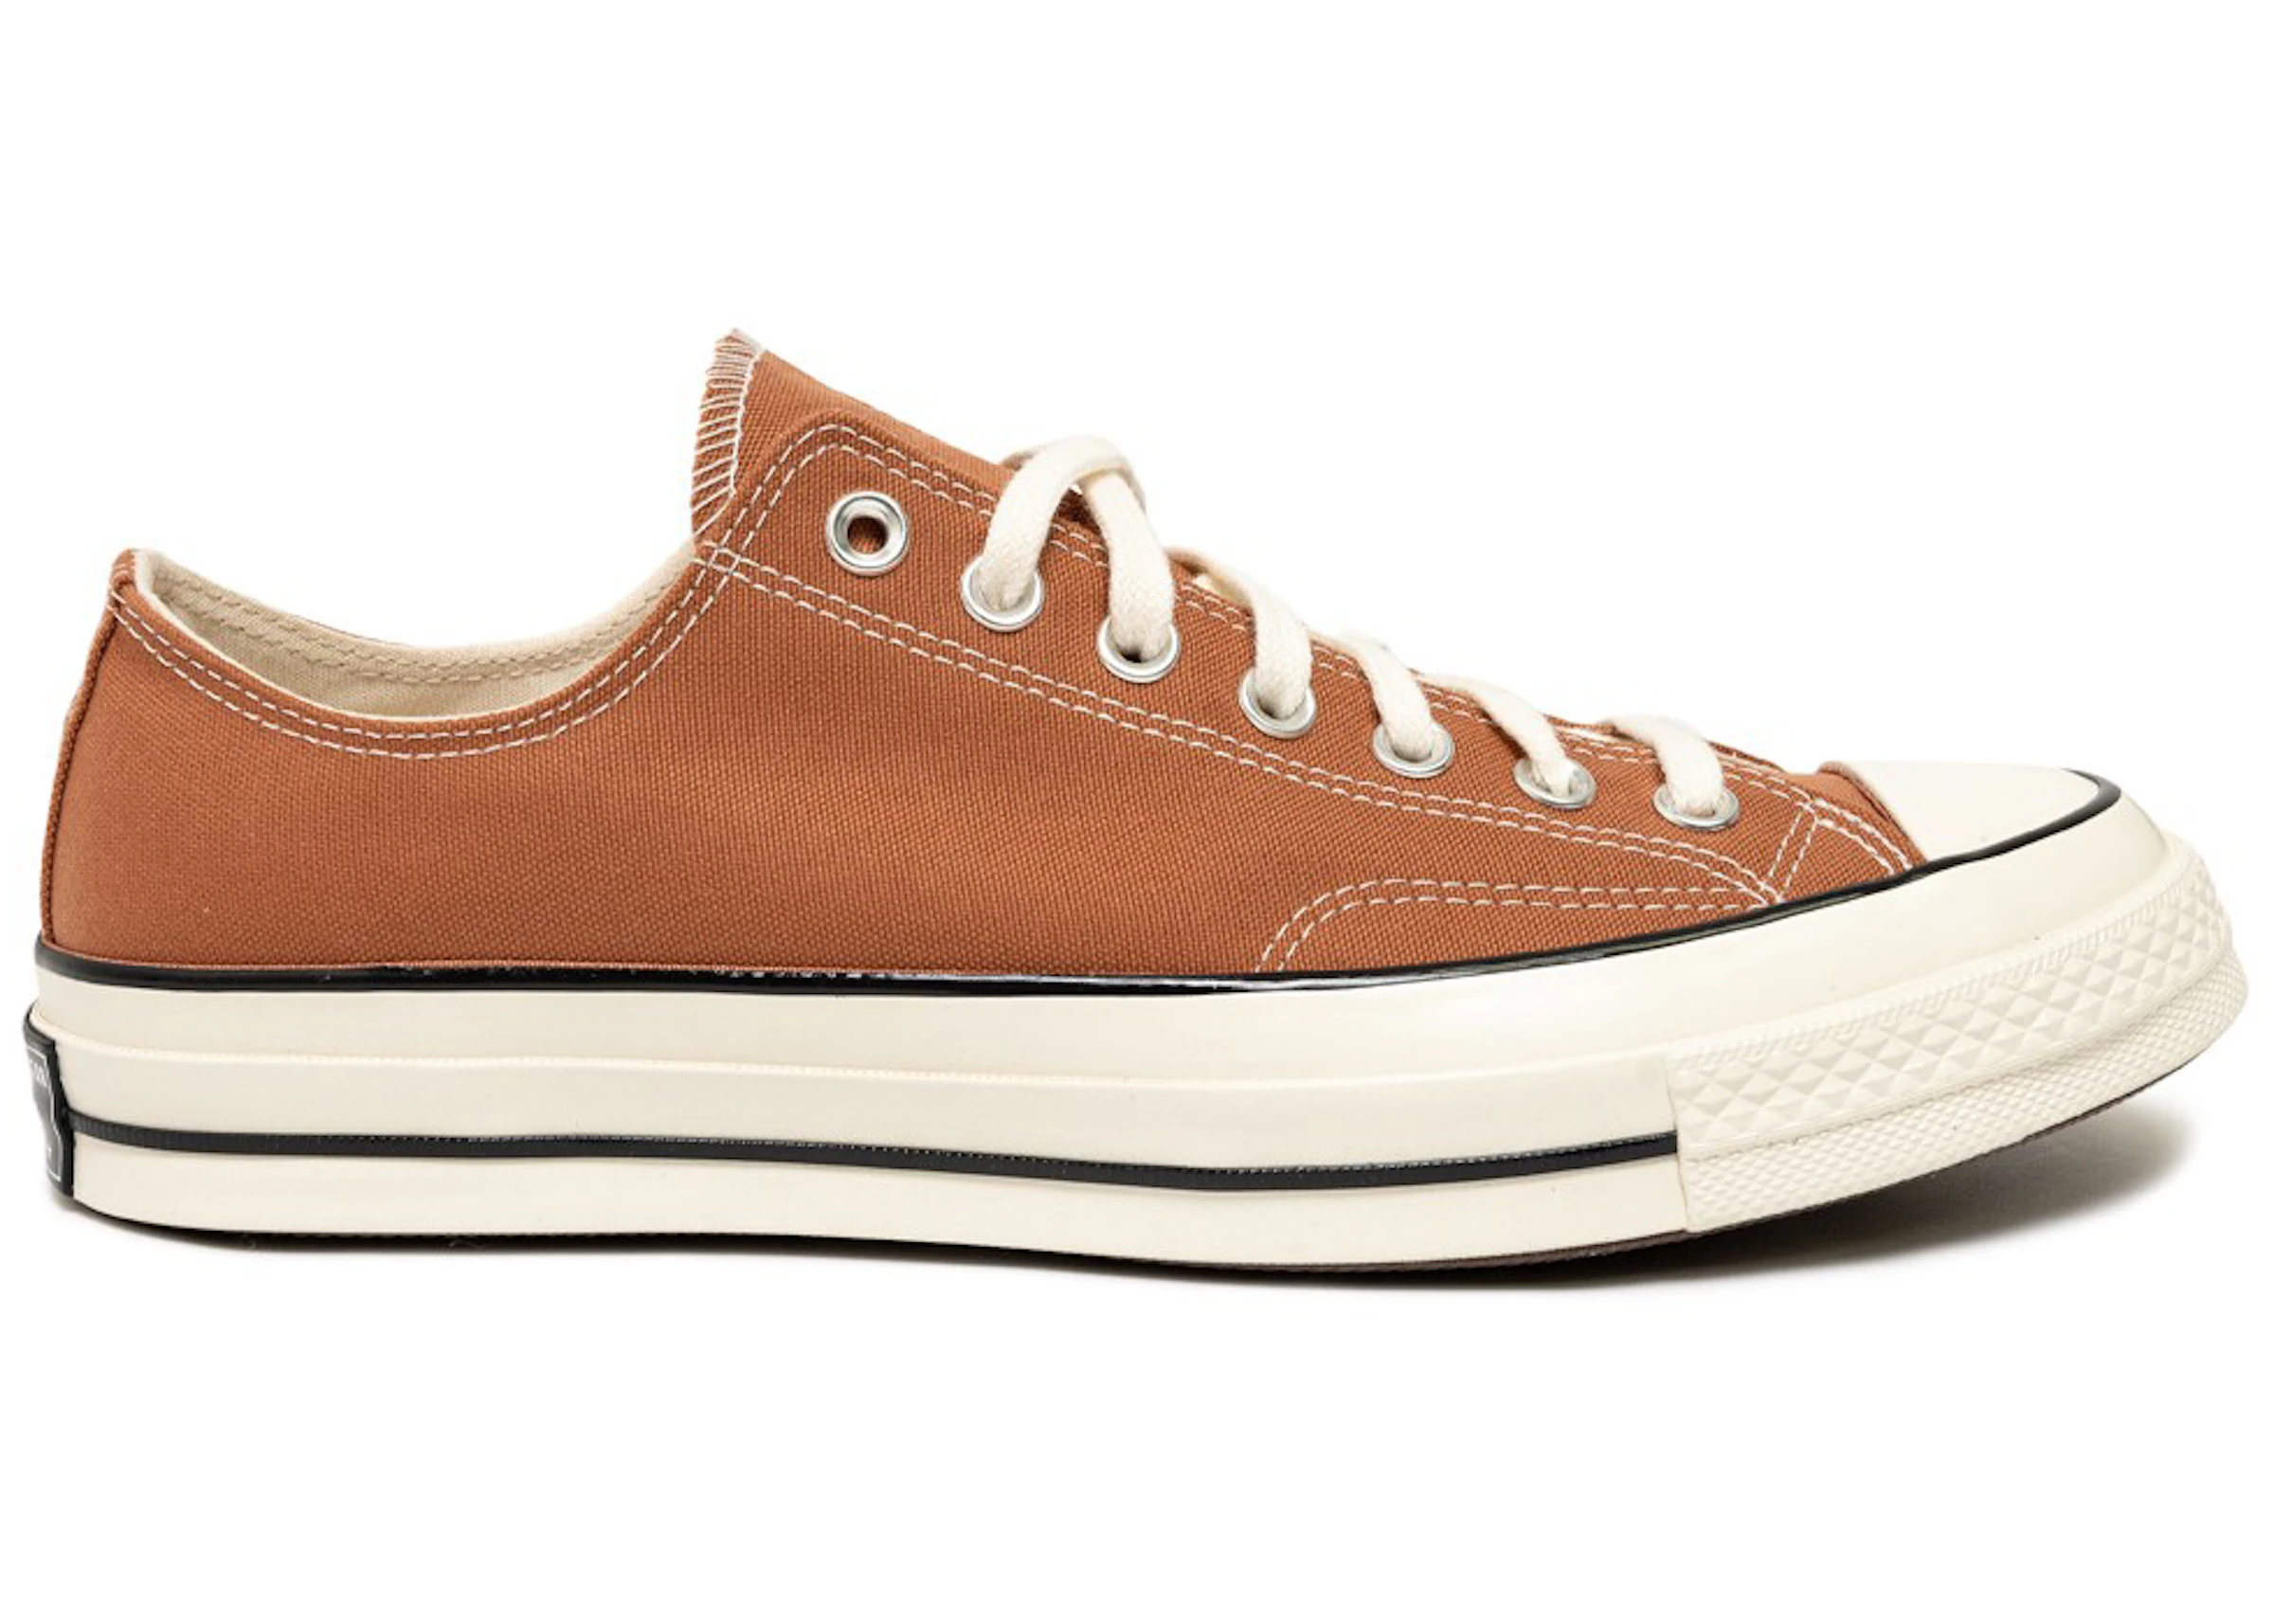 Converse Chuck Taylor All-Star 70 Ox Brown Mineral Clay - A00461C - US